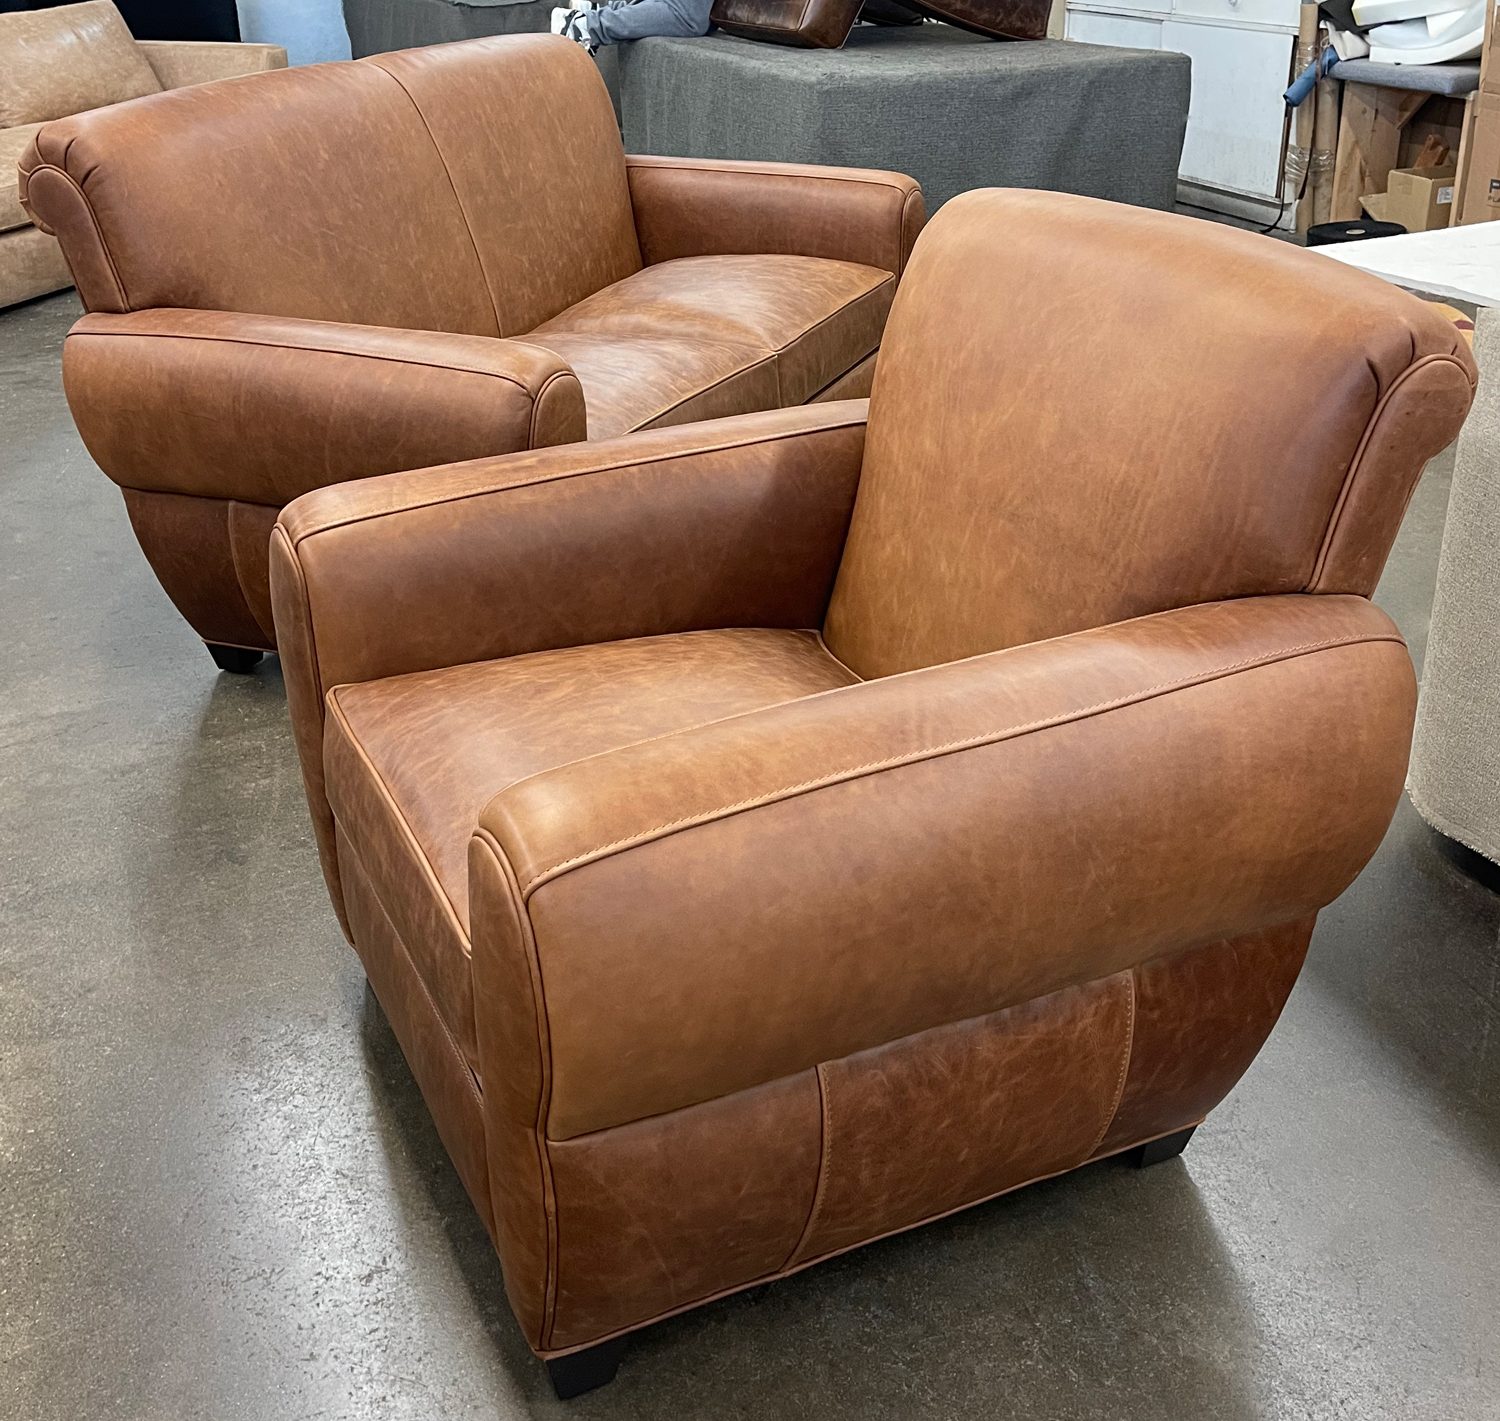 Midtown Leather Club Chair and Sofa Set in Brentwood Cuero Leather RAF LAF sides